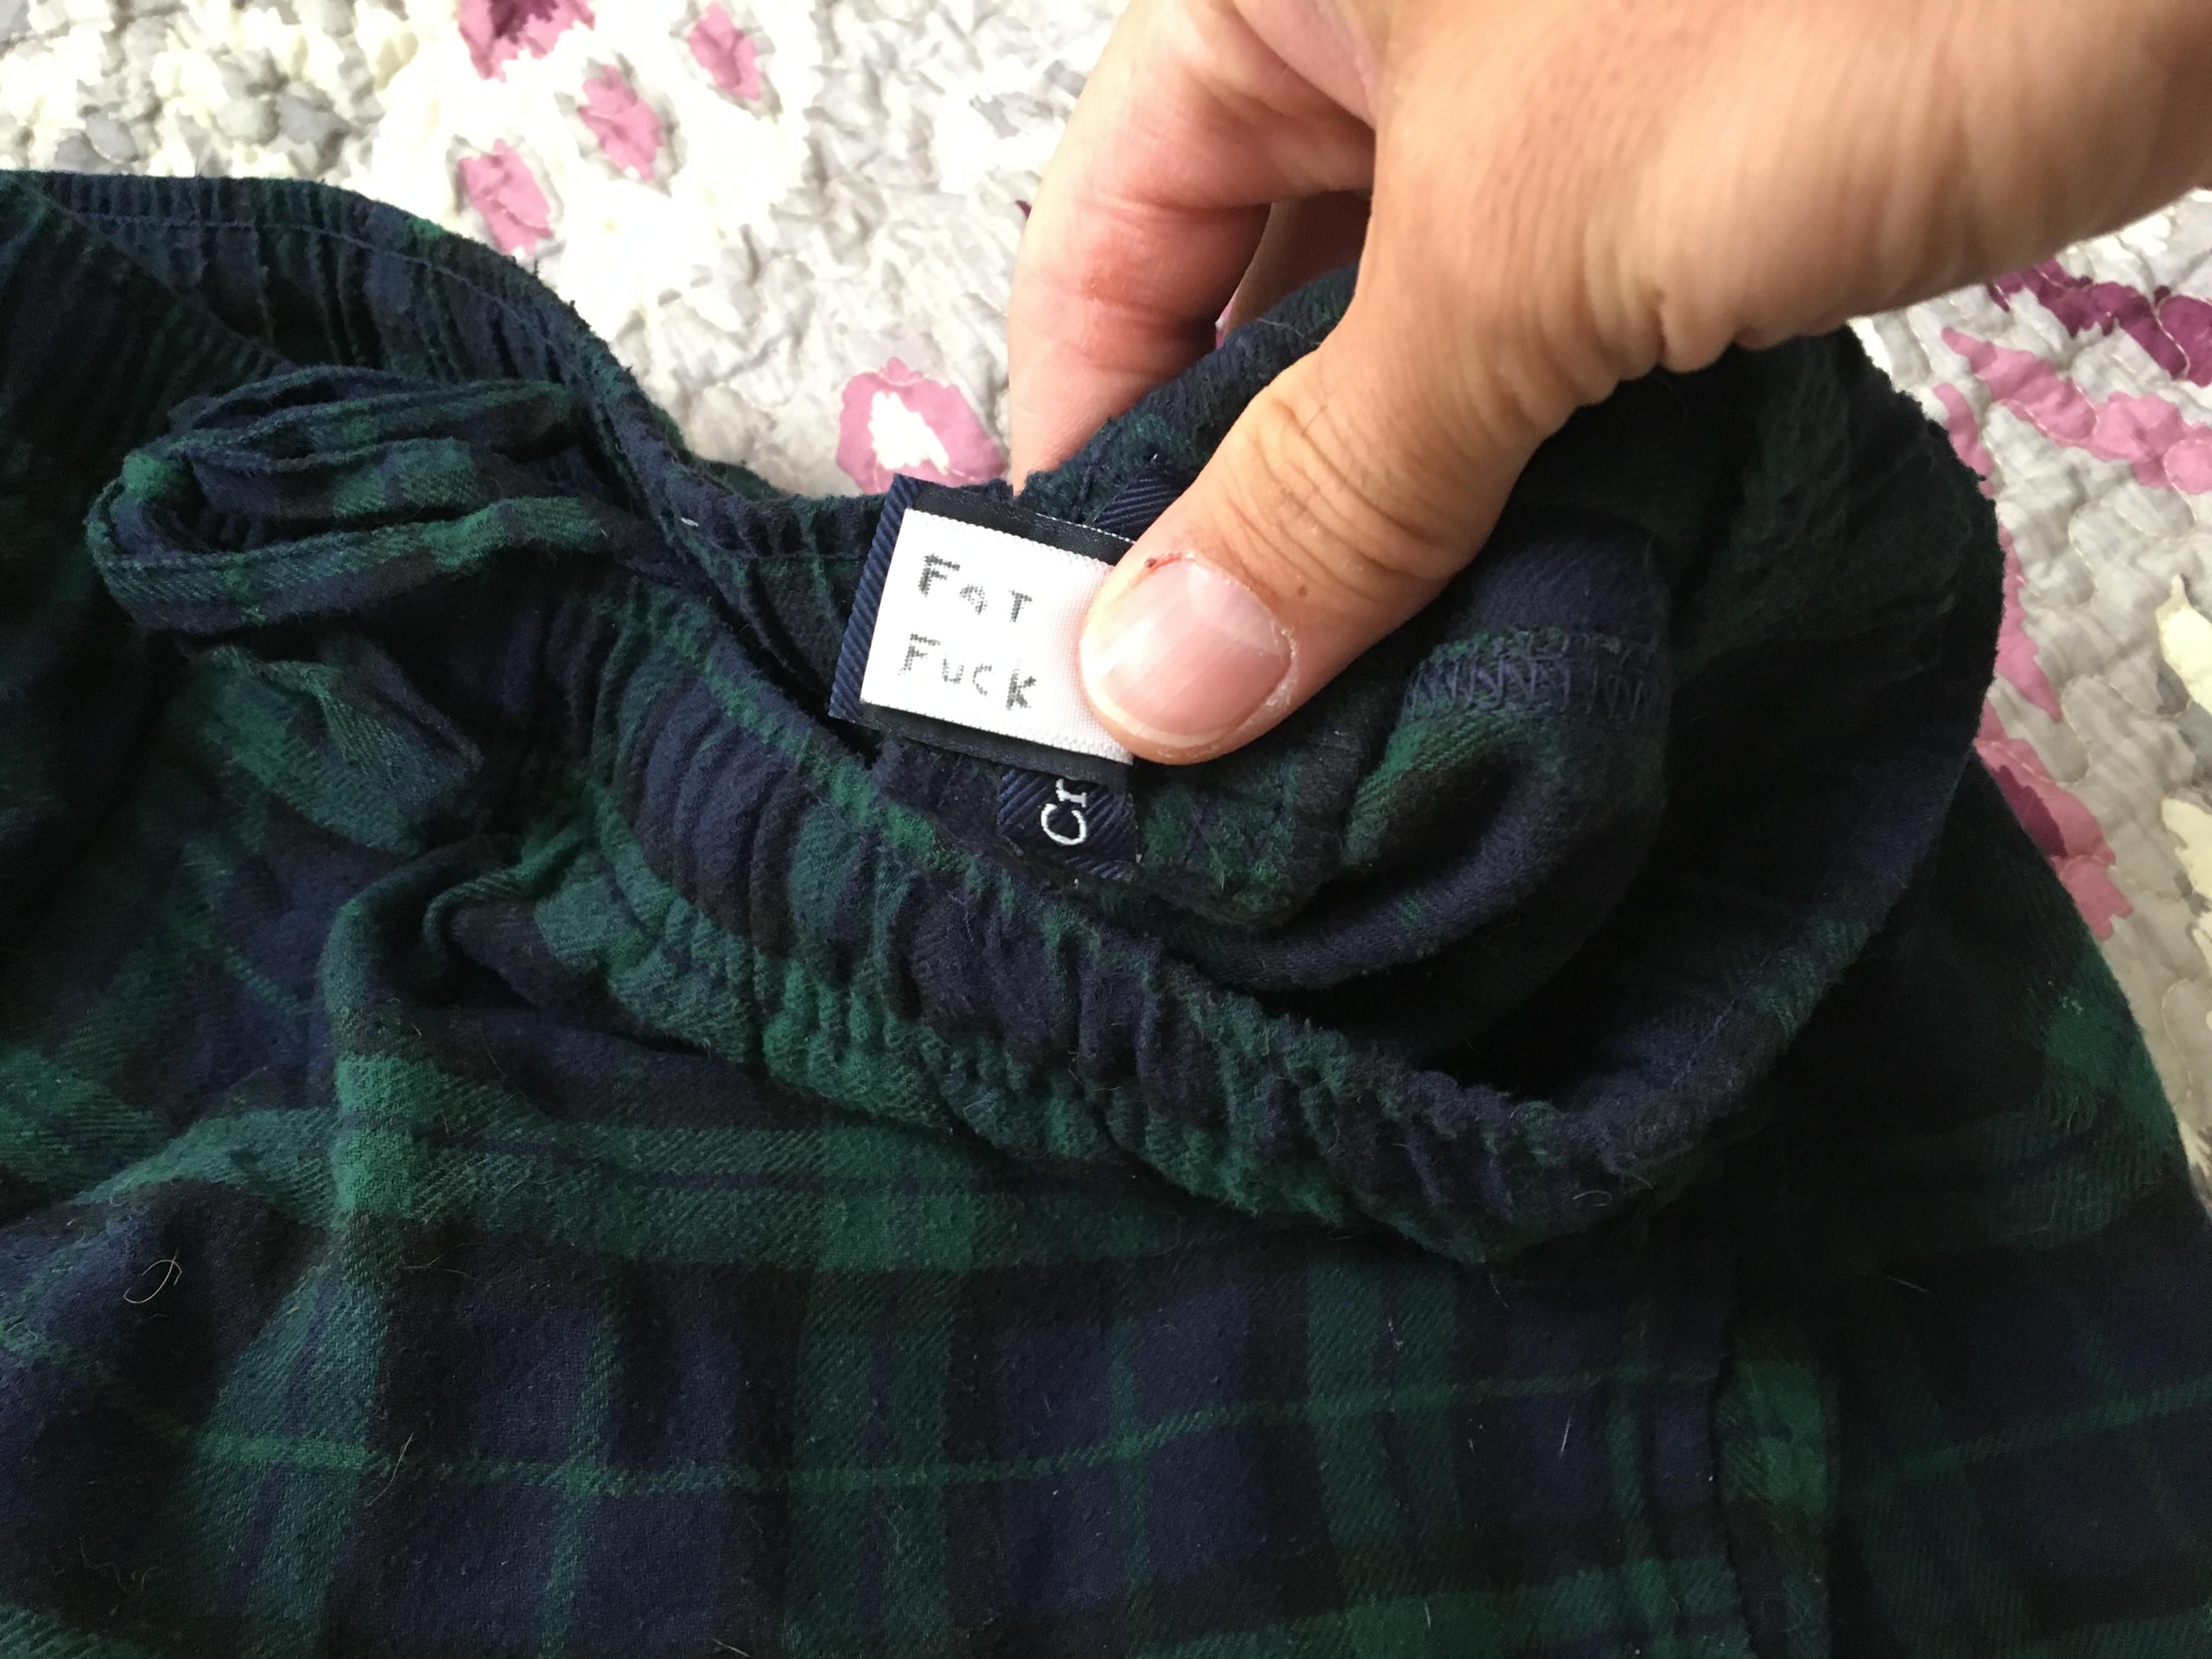 My best friend bought me pajama pants two years ago for my bday, just noticed the tag this morning